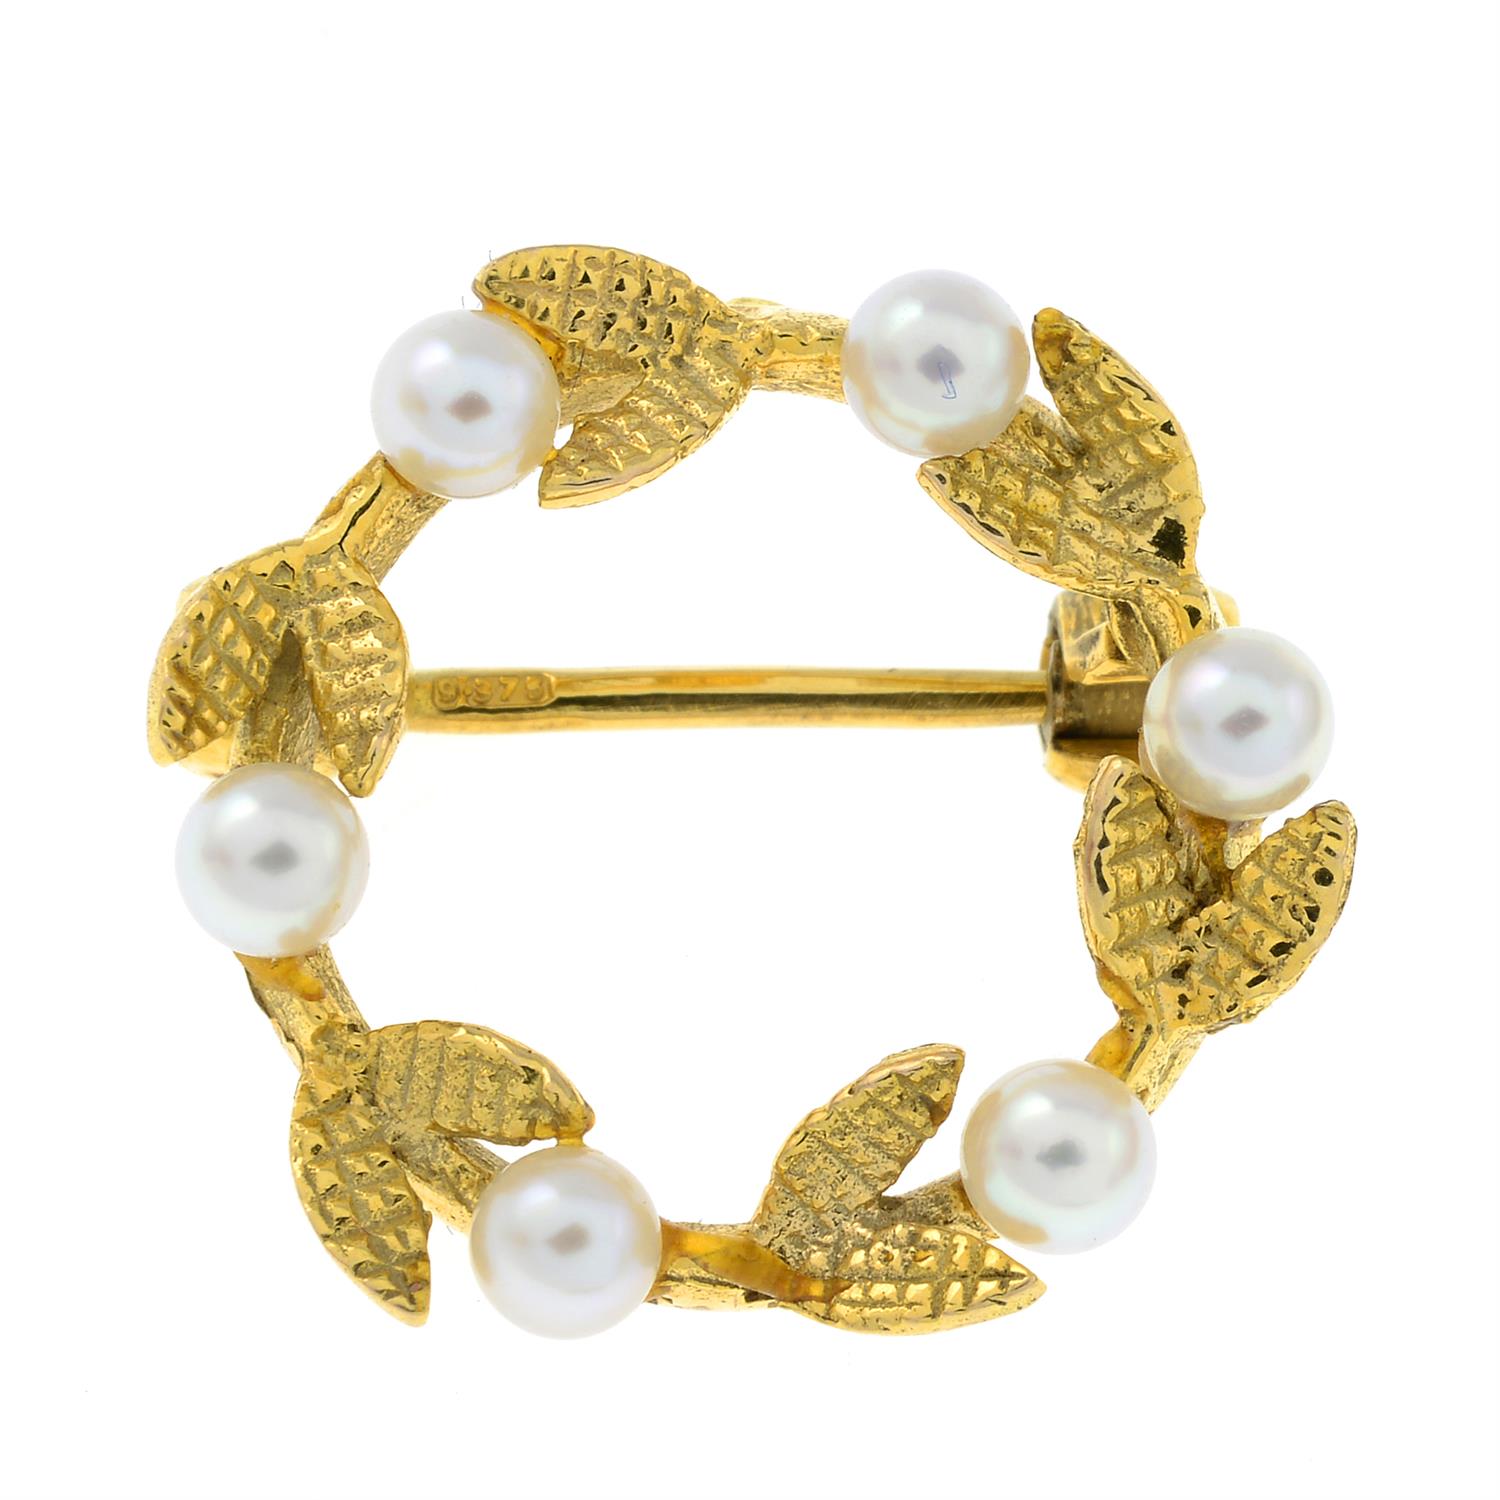 A 9ct gold cultured pearl wreath brooch.